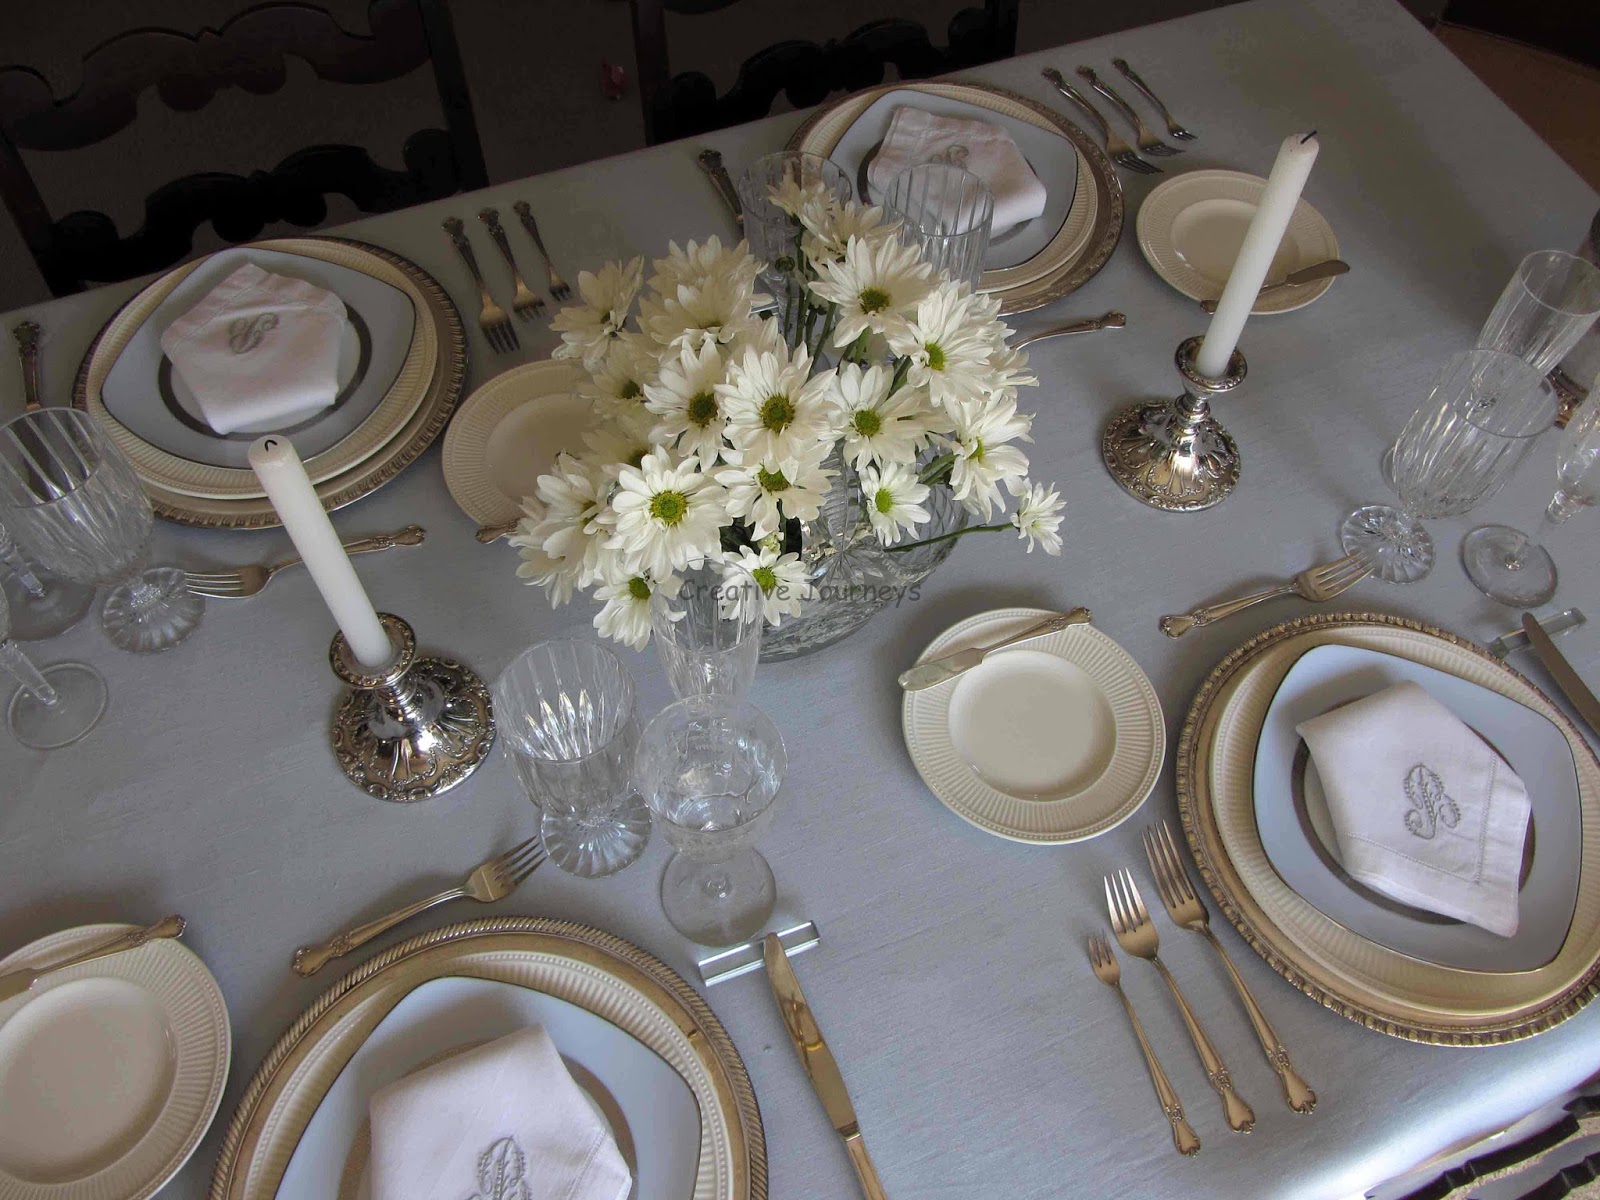 Creative Journeys: New pieces from Noritake tablescape